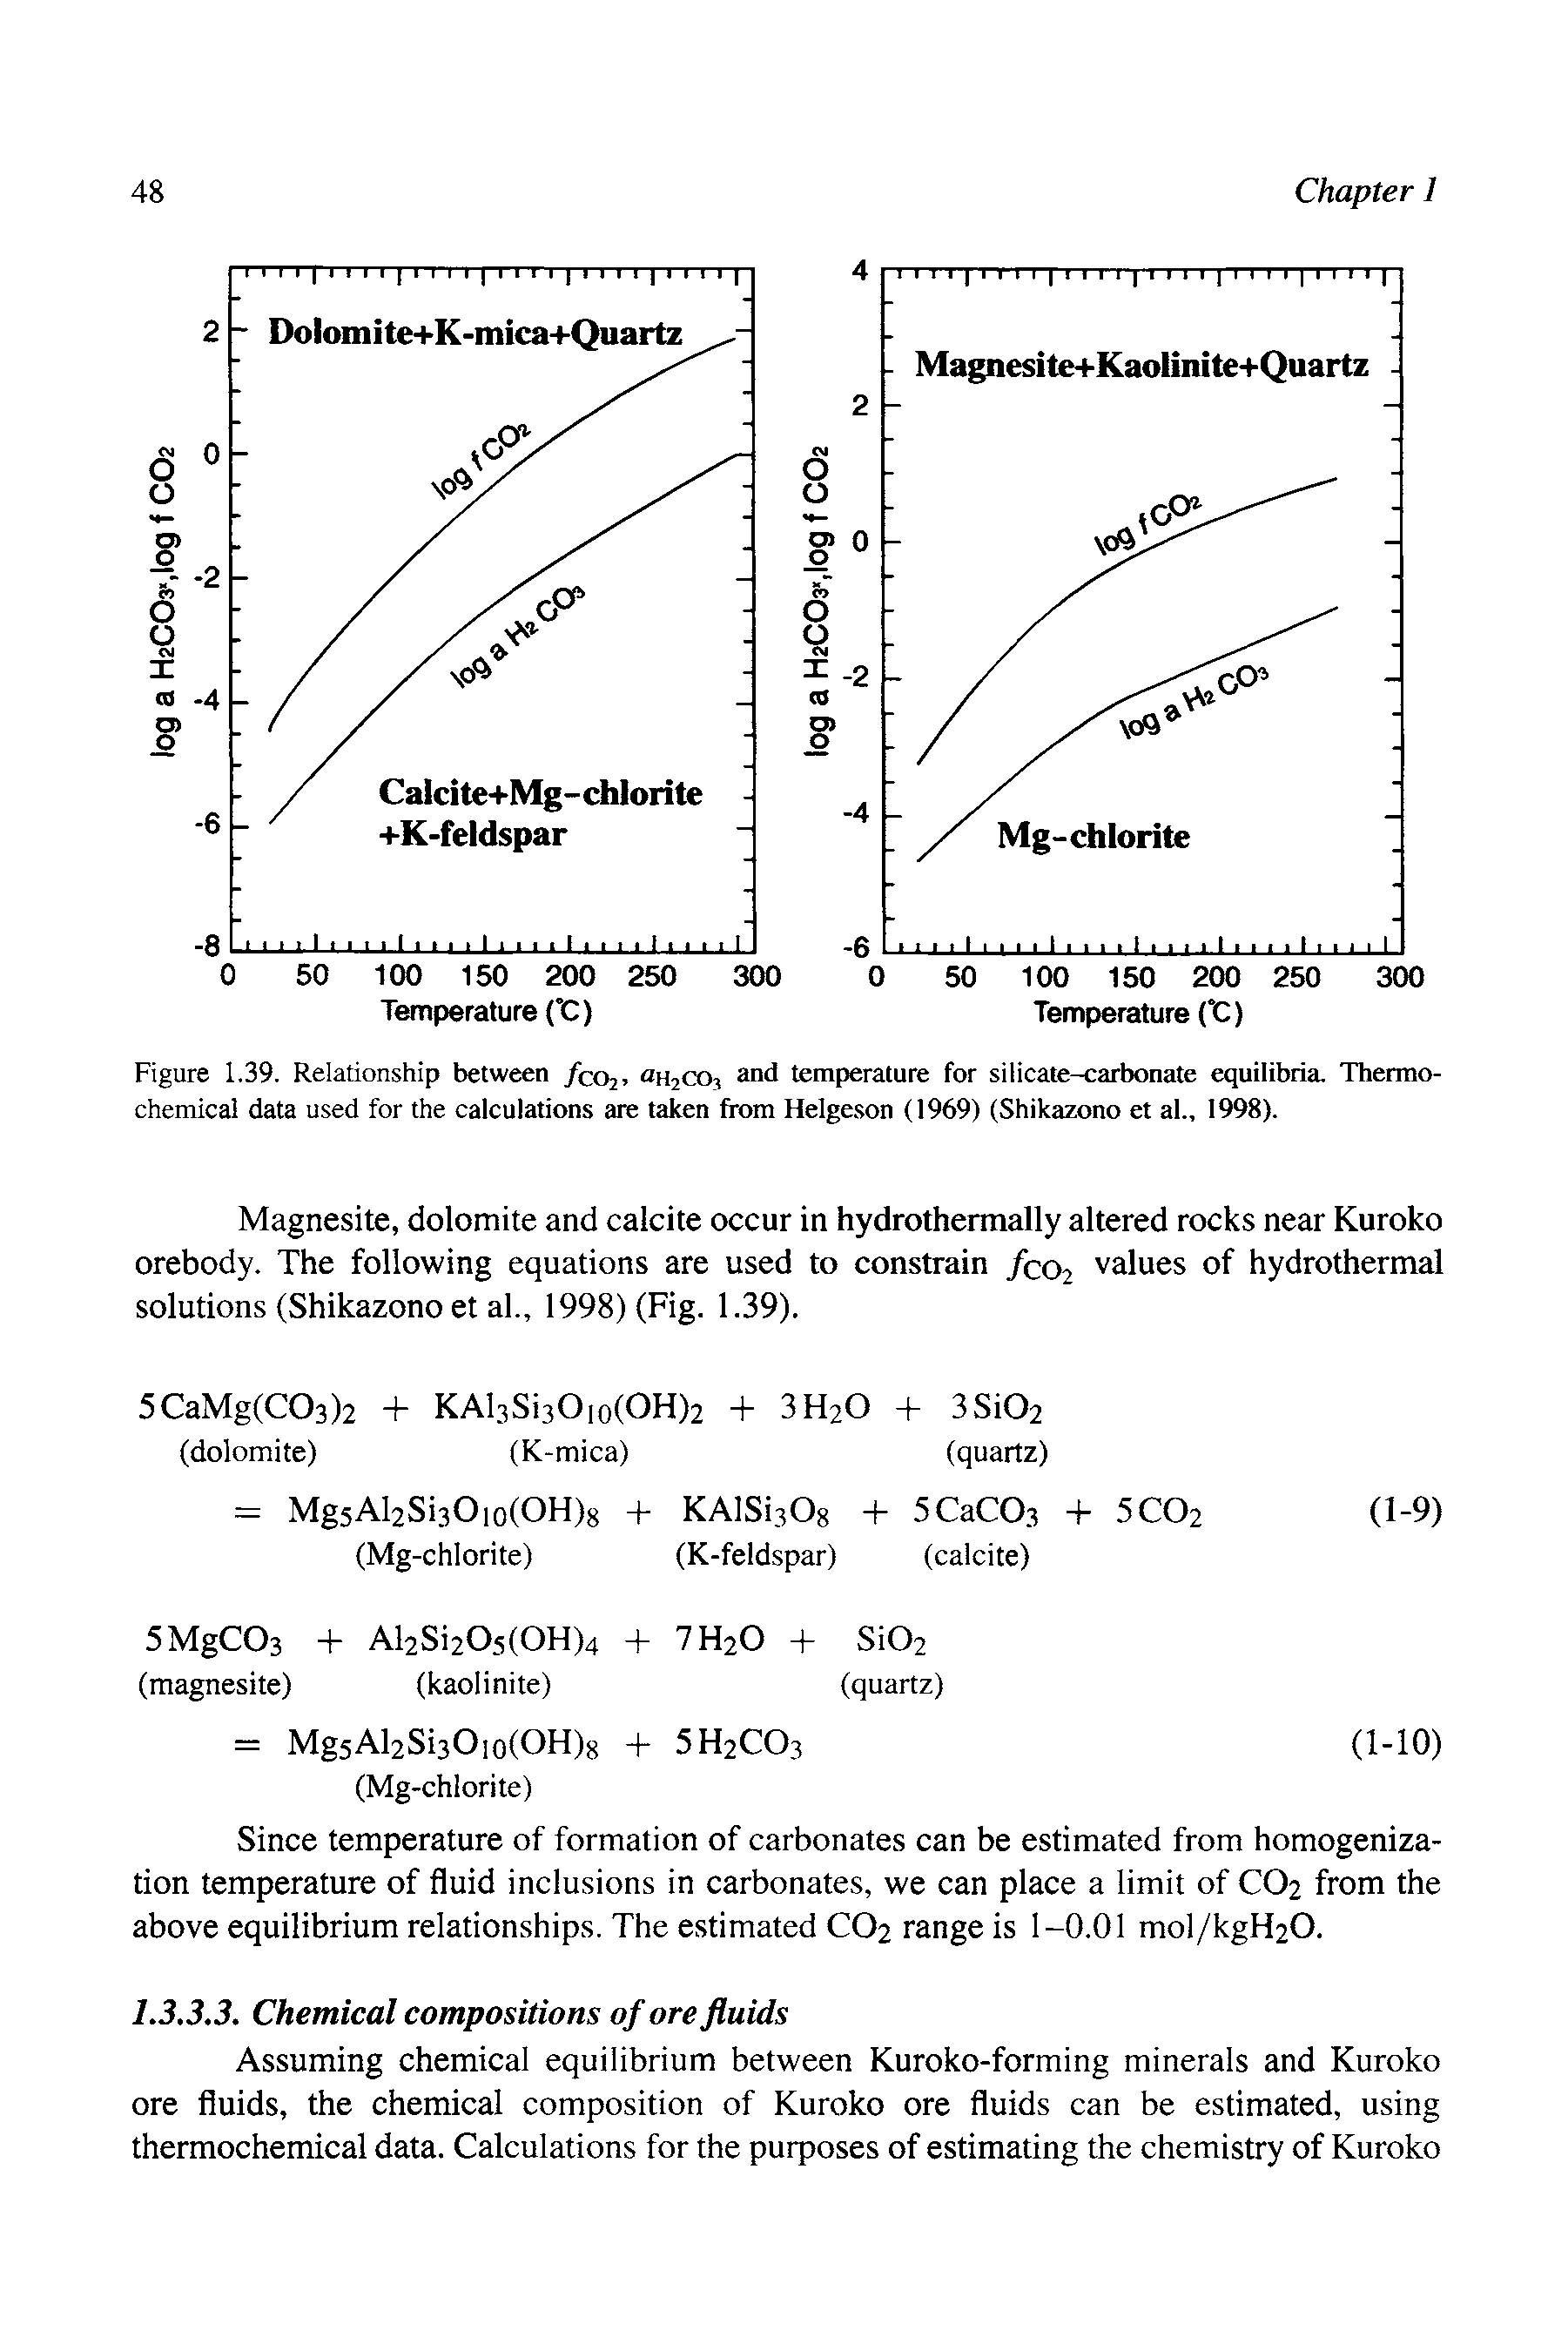 Figure 1.39. Relationship between /co2> oh2C05 and temperature for silicate-carbonate equilibria. Thermochemical data used for the calculations are taken from Helge.son (1969) (Shikazono et al., 1998).